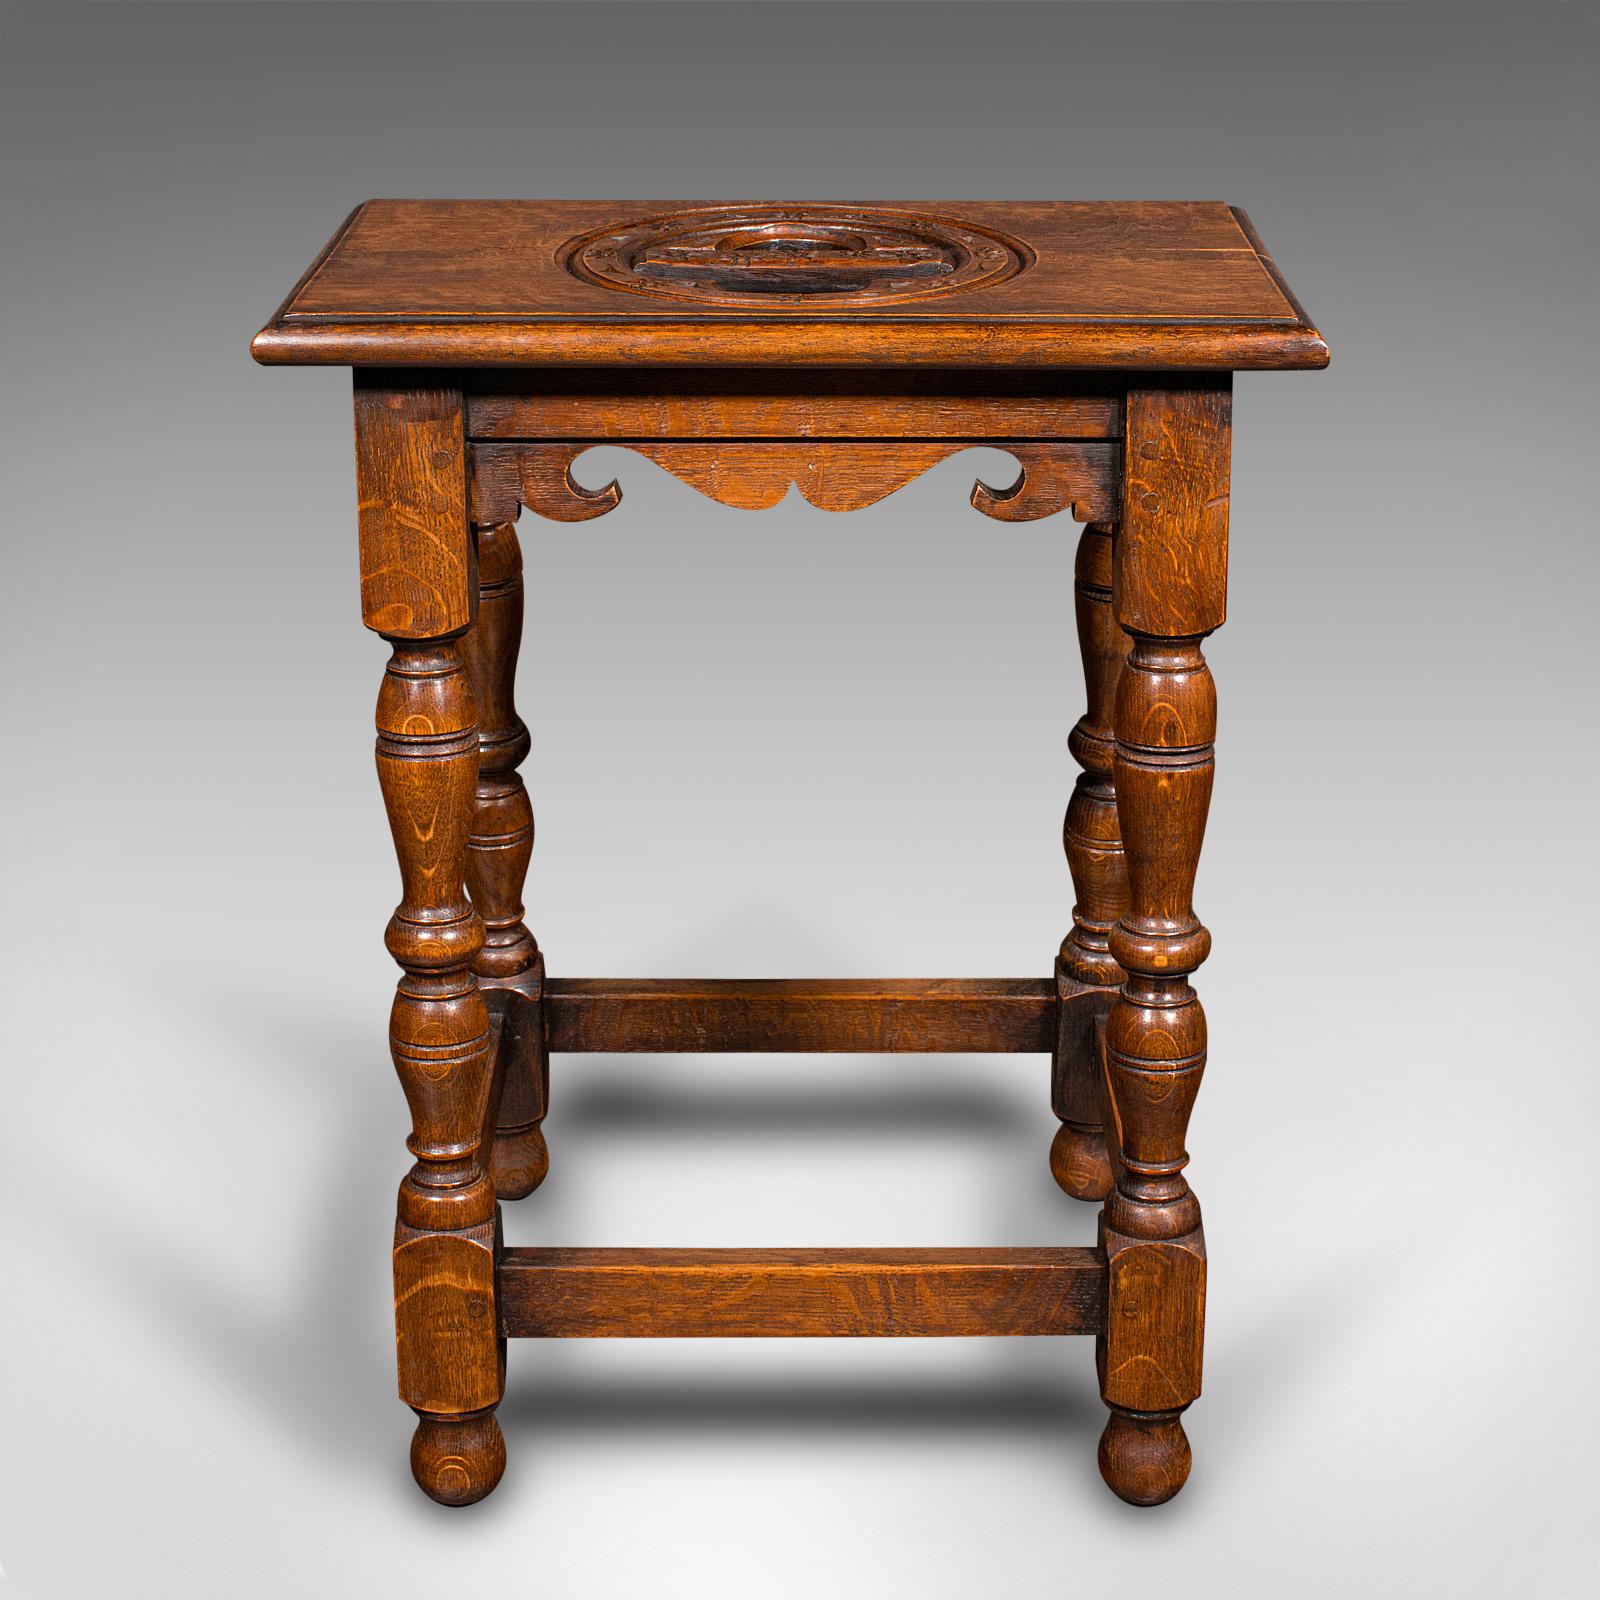 Antique Verger's Stool, English, Oak, Ecclesiastical, Hallway, Victorian, C.1900 In Good Condition For Sale In Hele, Devon, GB